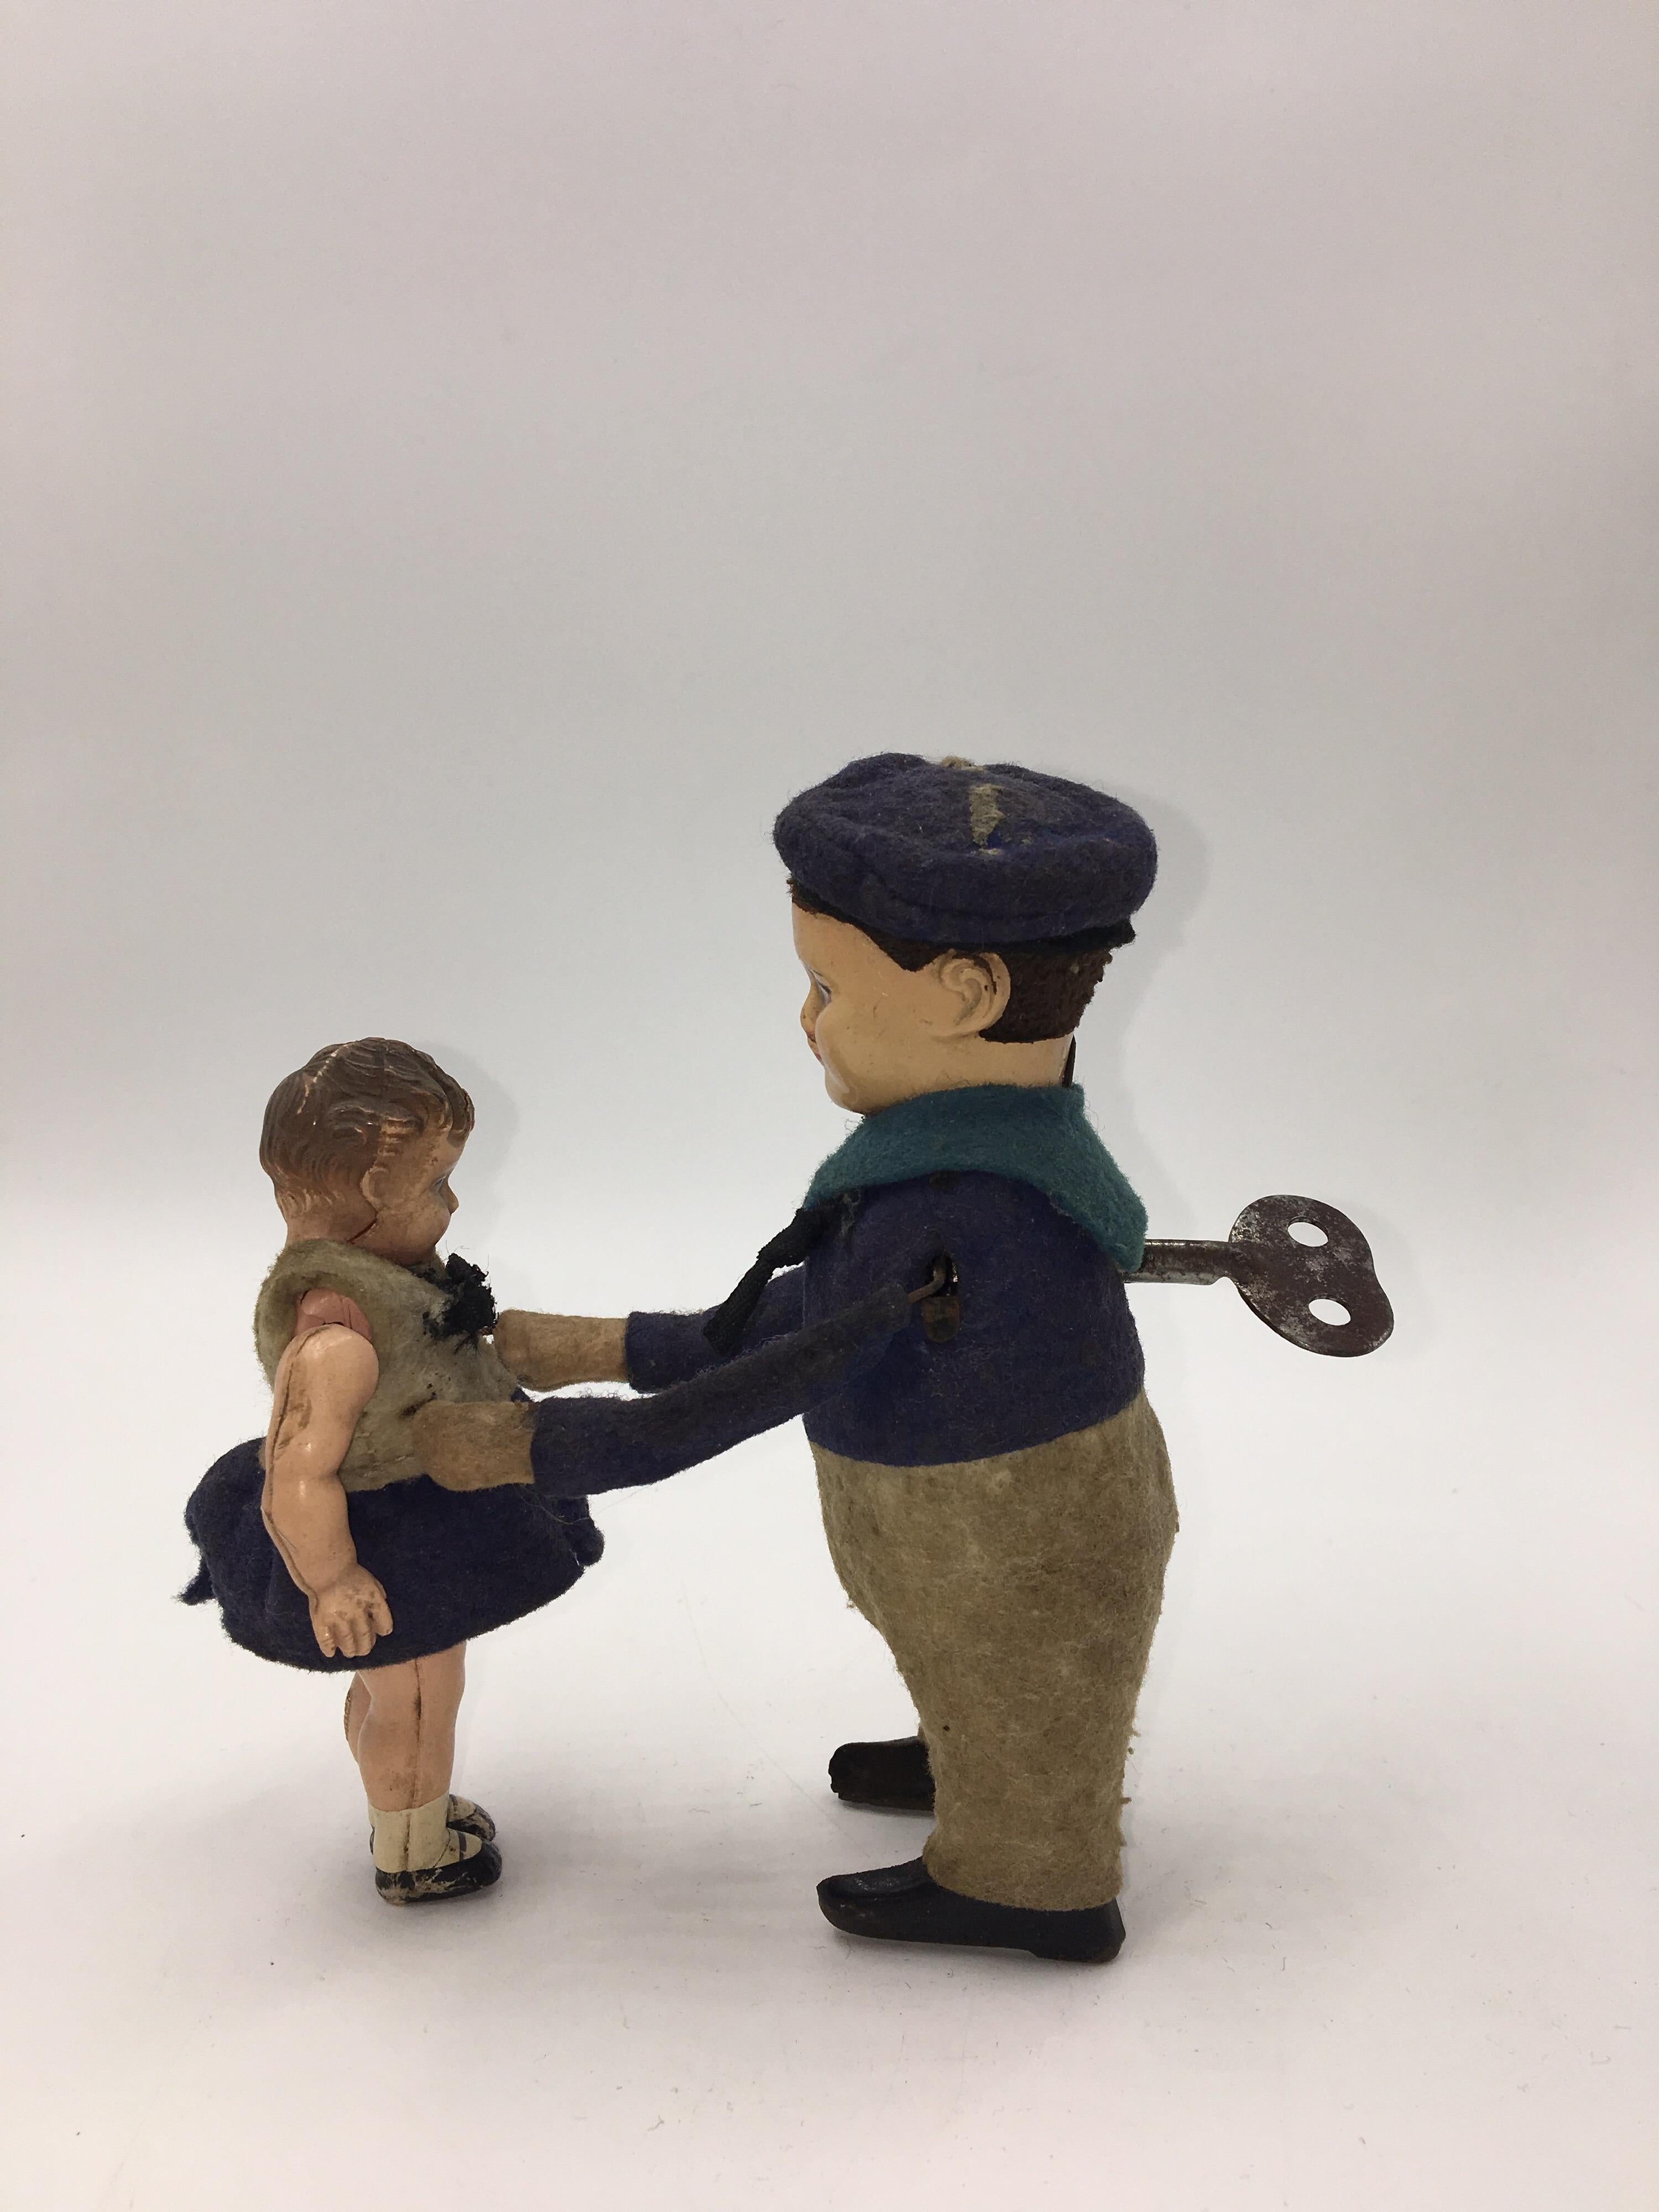 Vintage Schuco Wind Up Toy, Dancing German Couple, circa 1930 For Sale 2